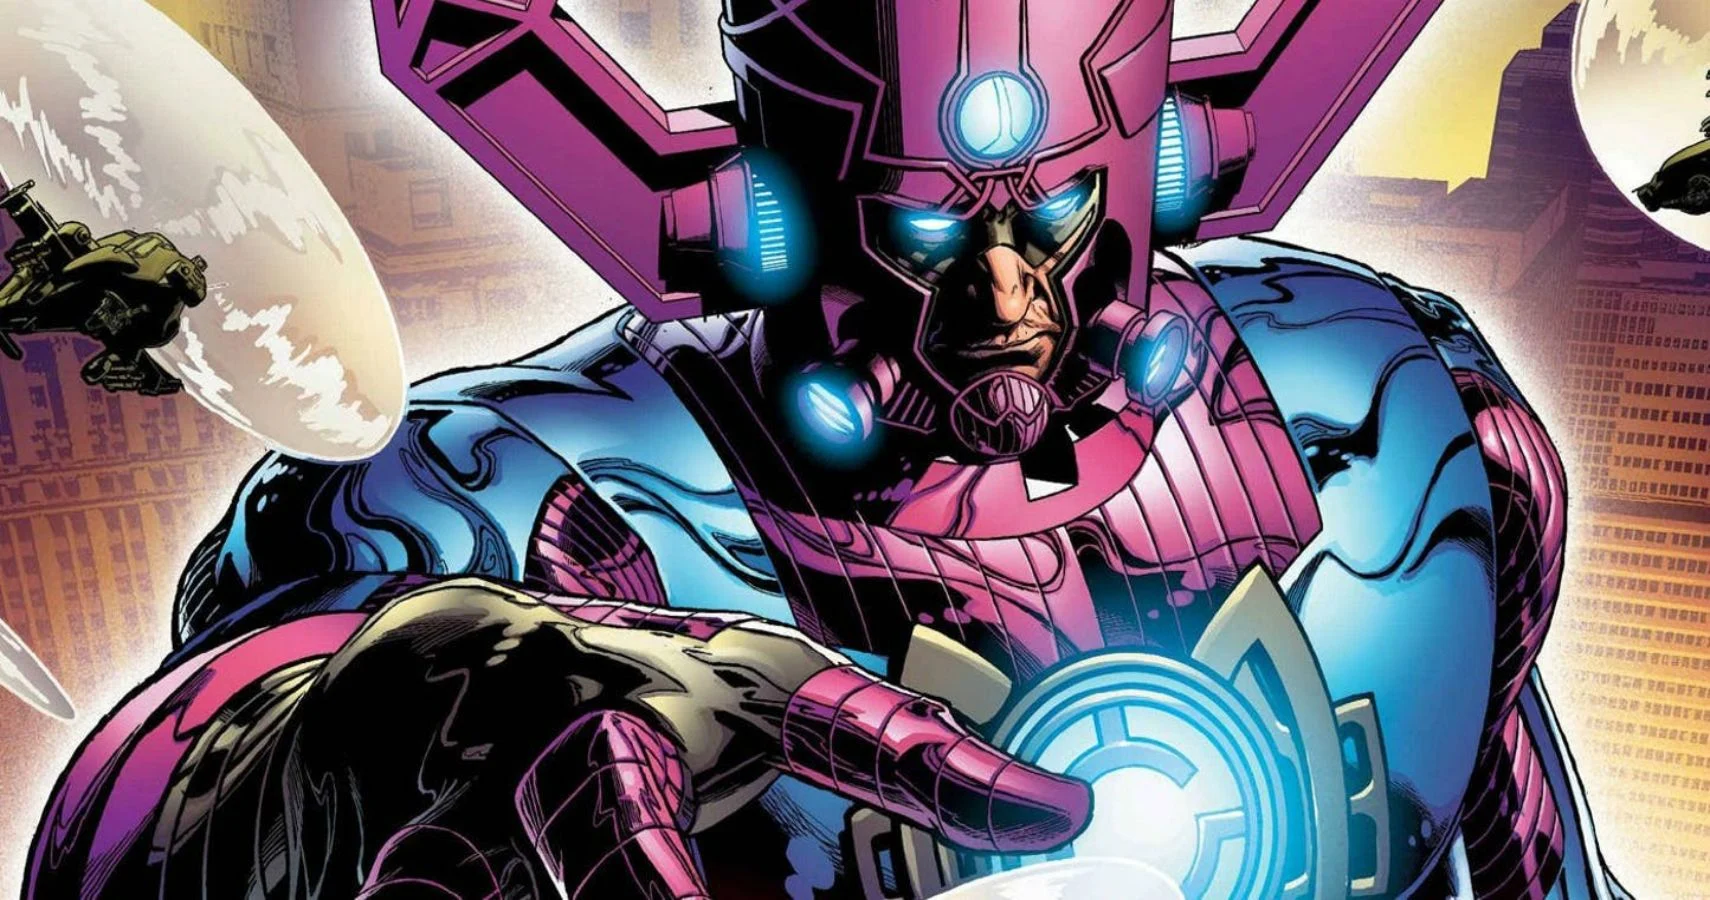 HOW A GOOD-HEARTED SCIENTIST BECOME GALACTUS-THE DEVOURER OF WORLDS